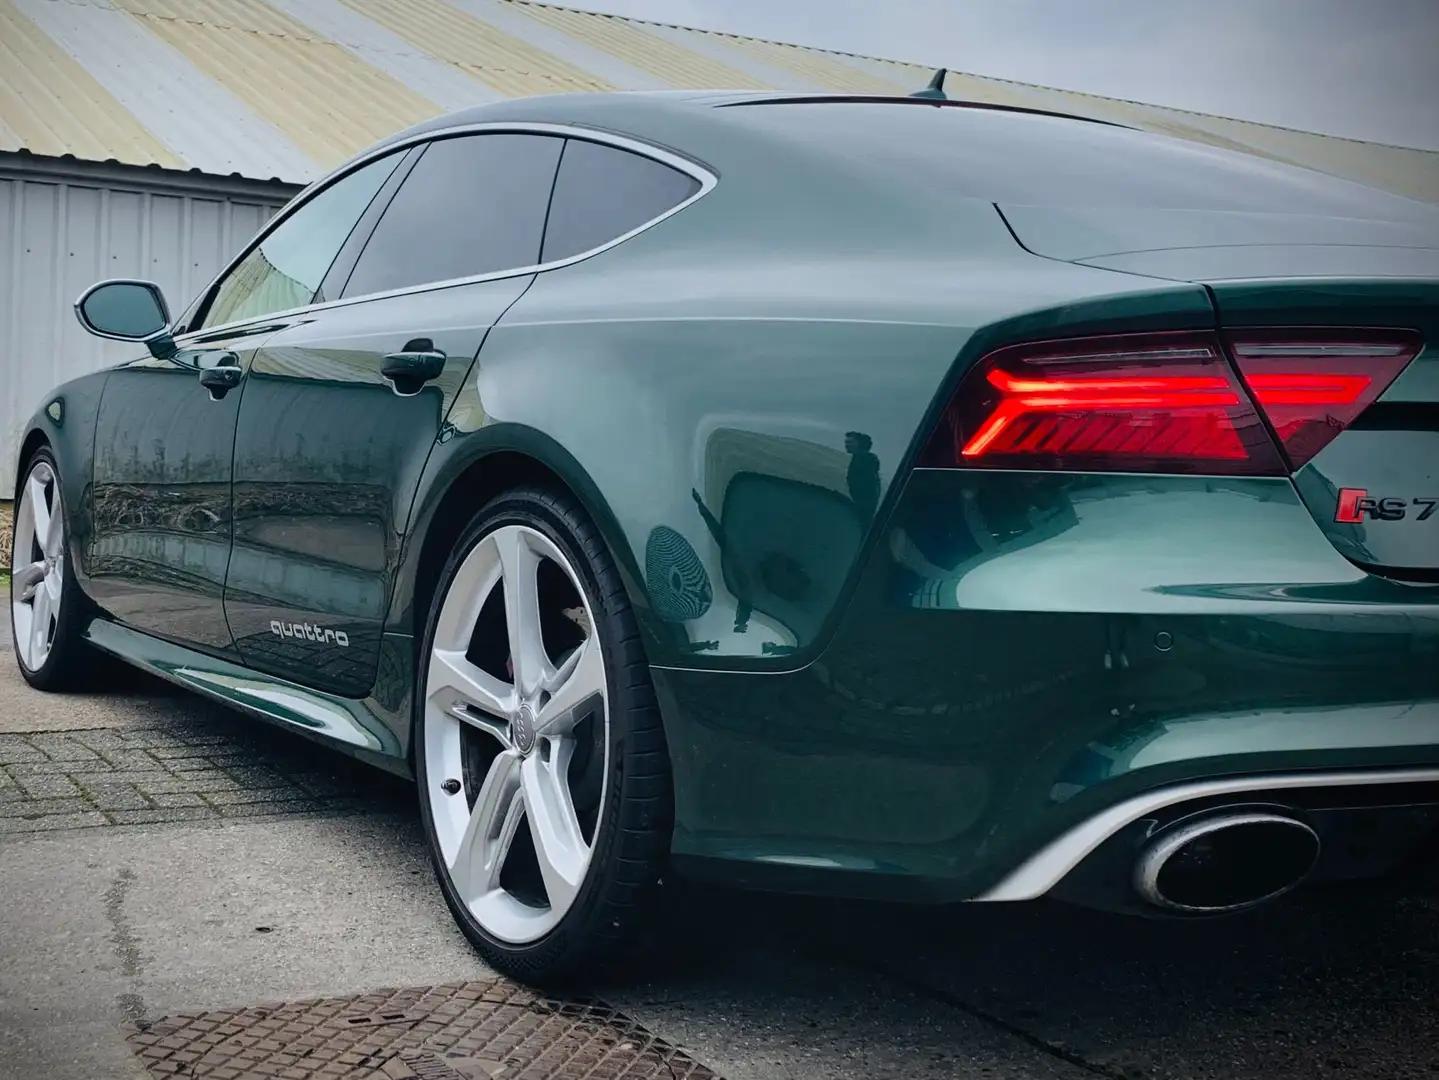 Audi RS7 Verdant Green - Audi Exclusive - from collector Zöld - 2